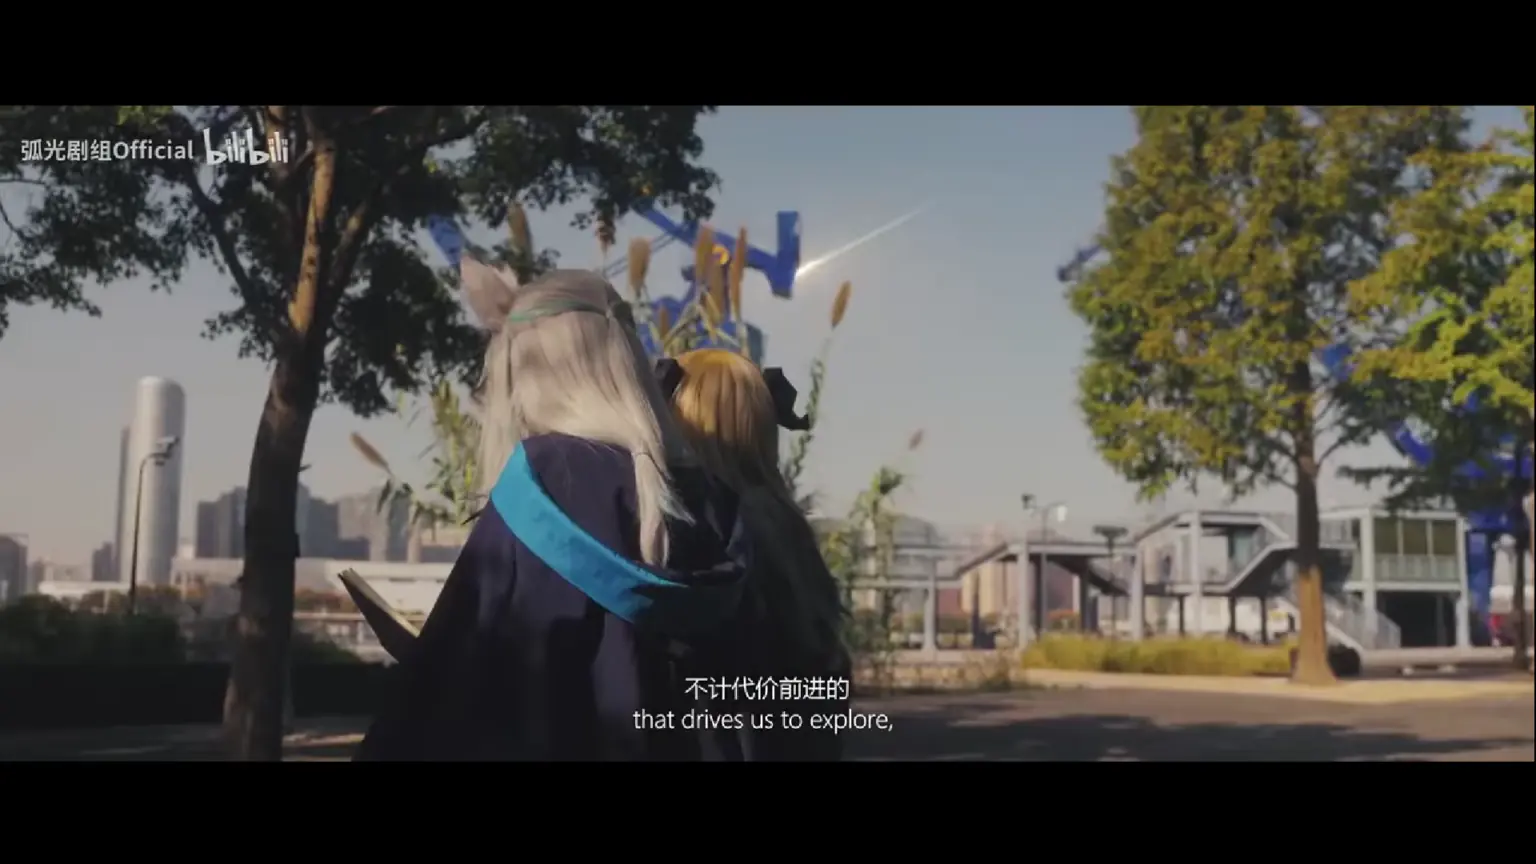 Amazing Arknights live action is produced by fans